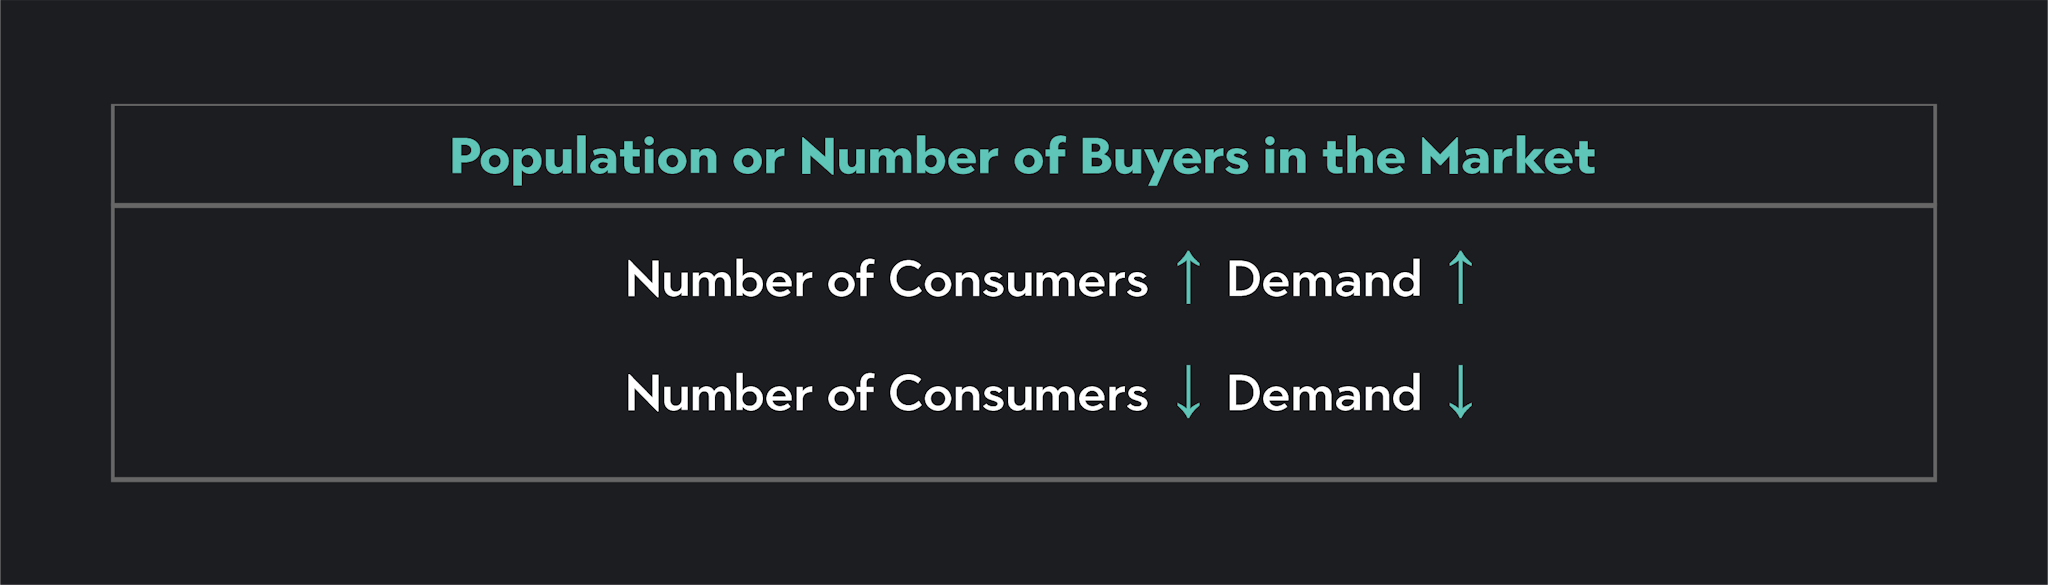 Graph showing how demand and number of consumers change in the market